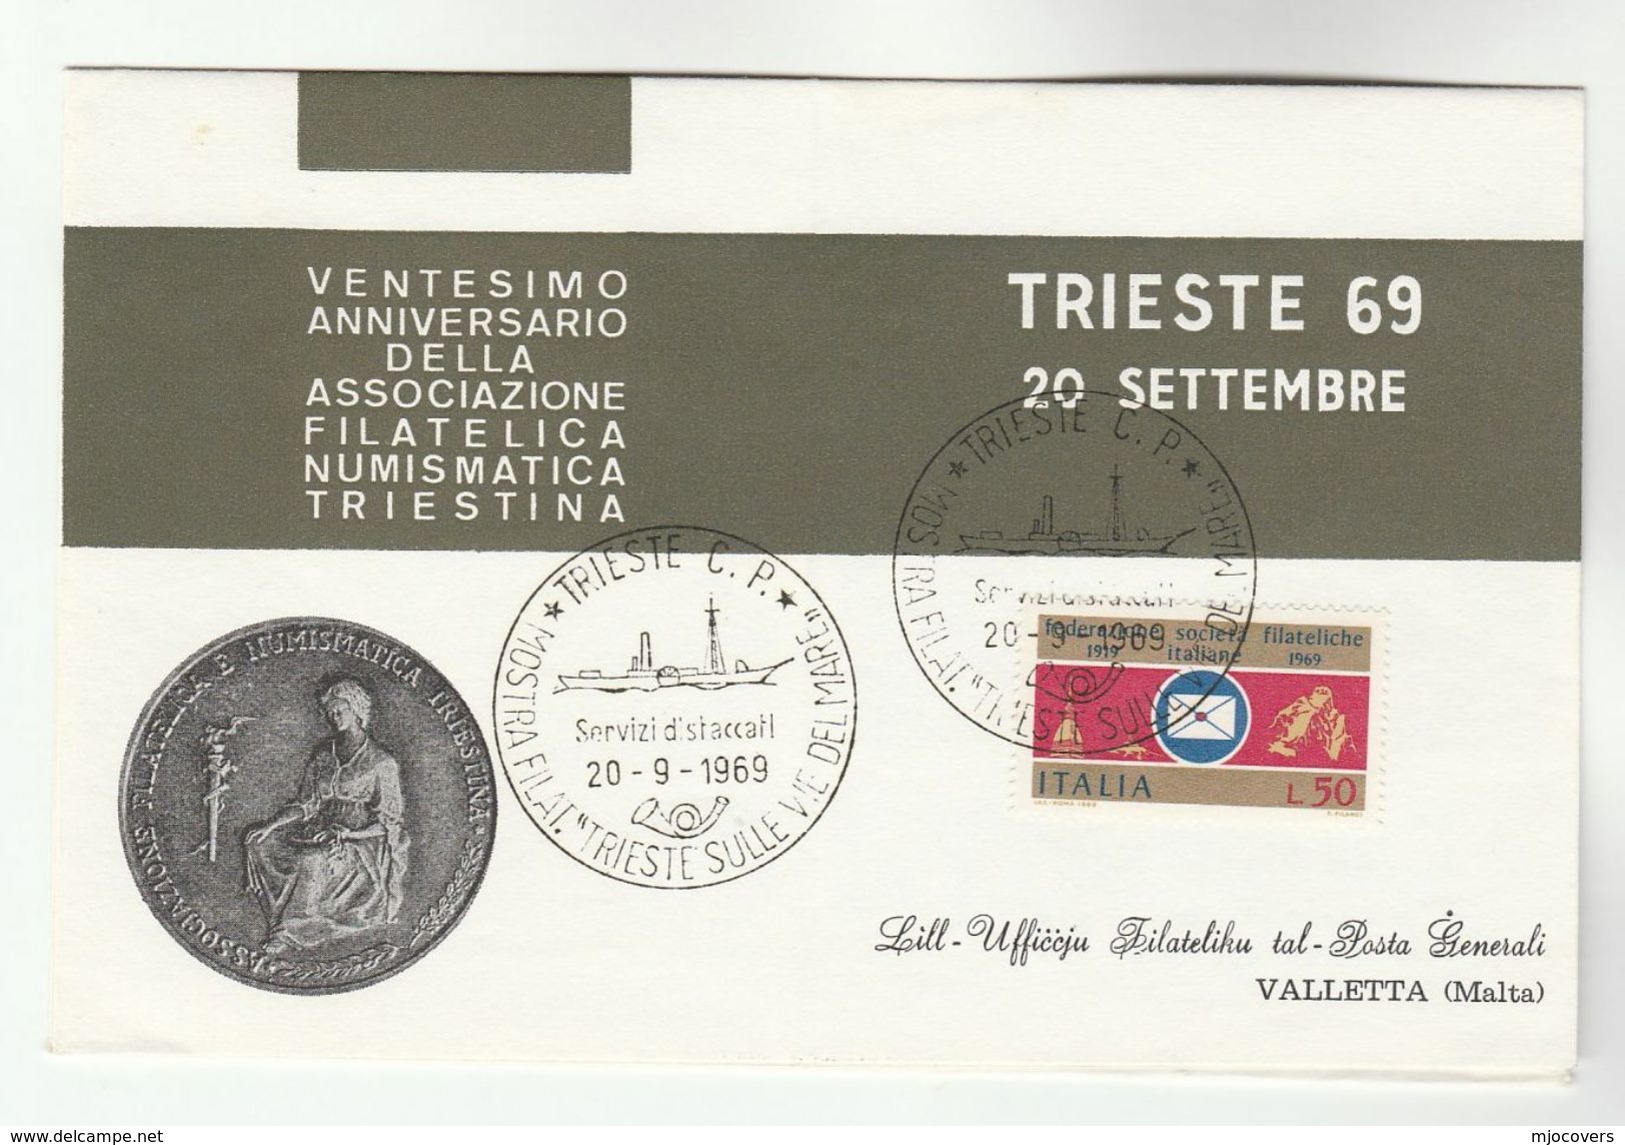 1969 Trieste ITALY/ Victoria  MALTA Special JOINT EVENT COVER Stamps Lettersheet Philatelic Exhibition - 1971-80: Marcophilia